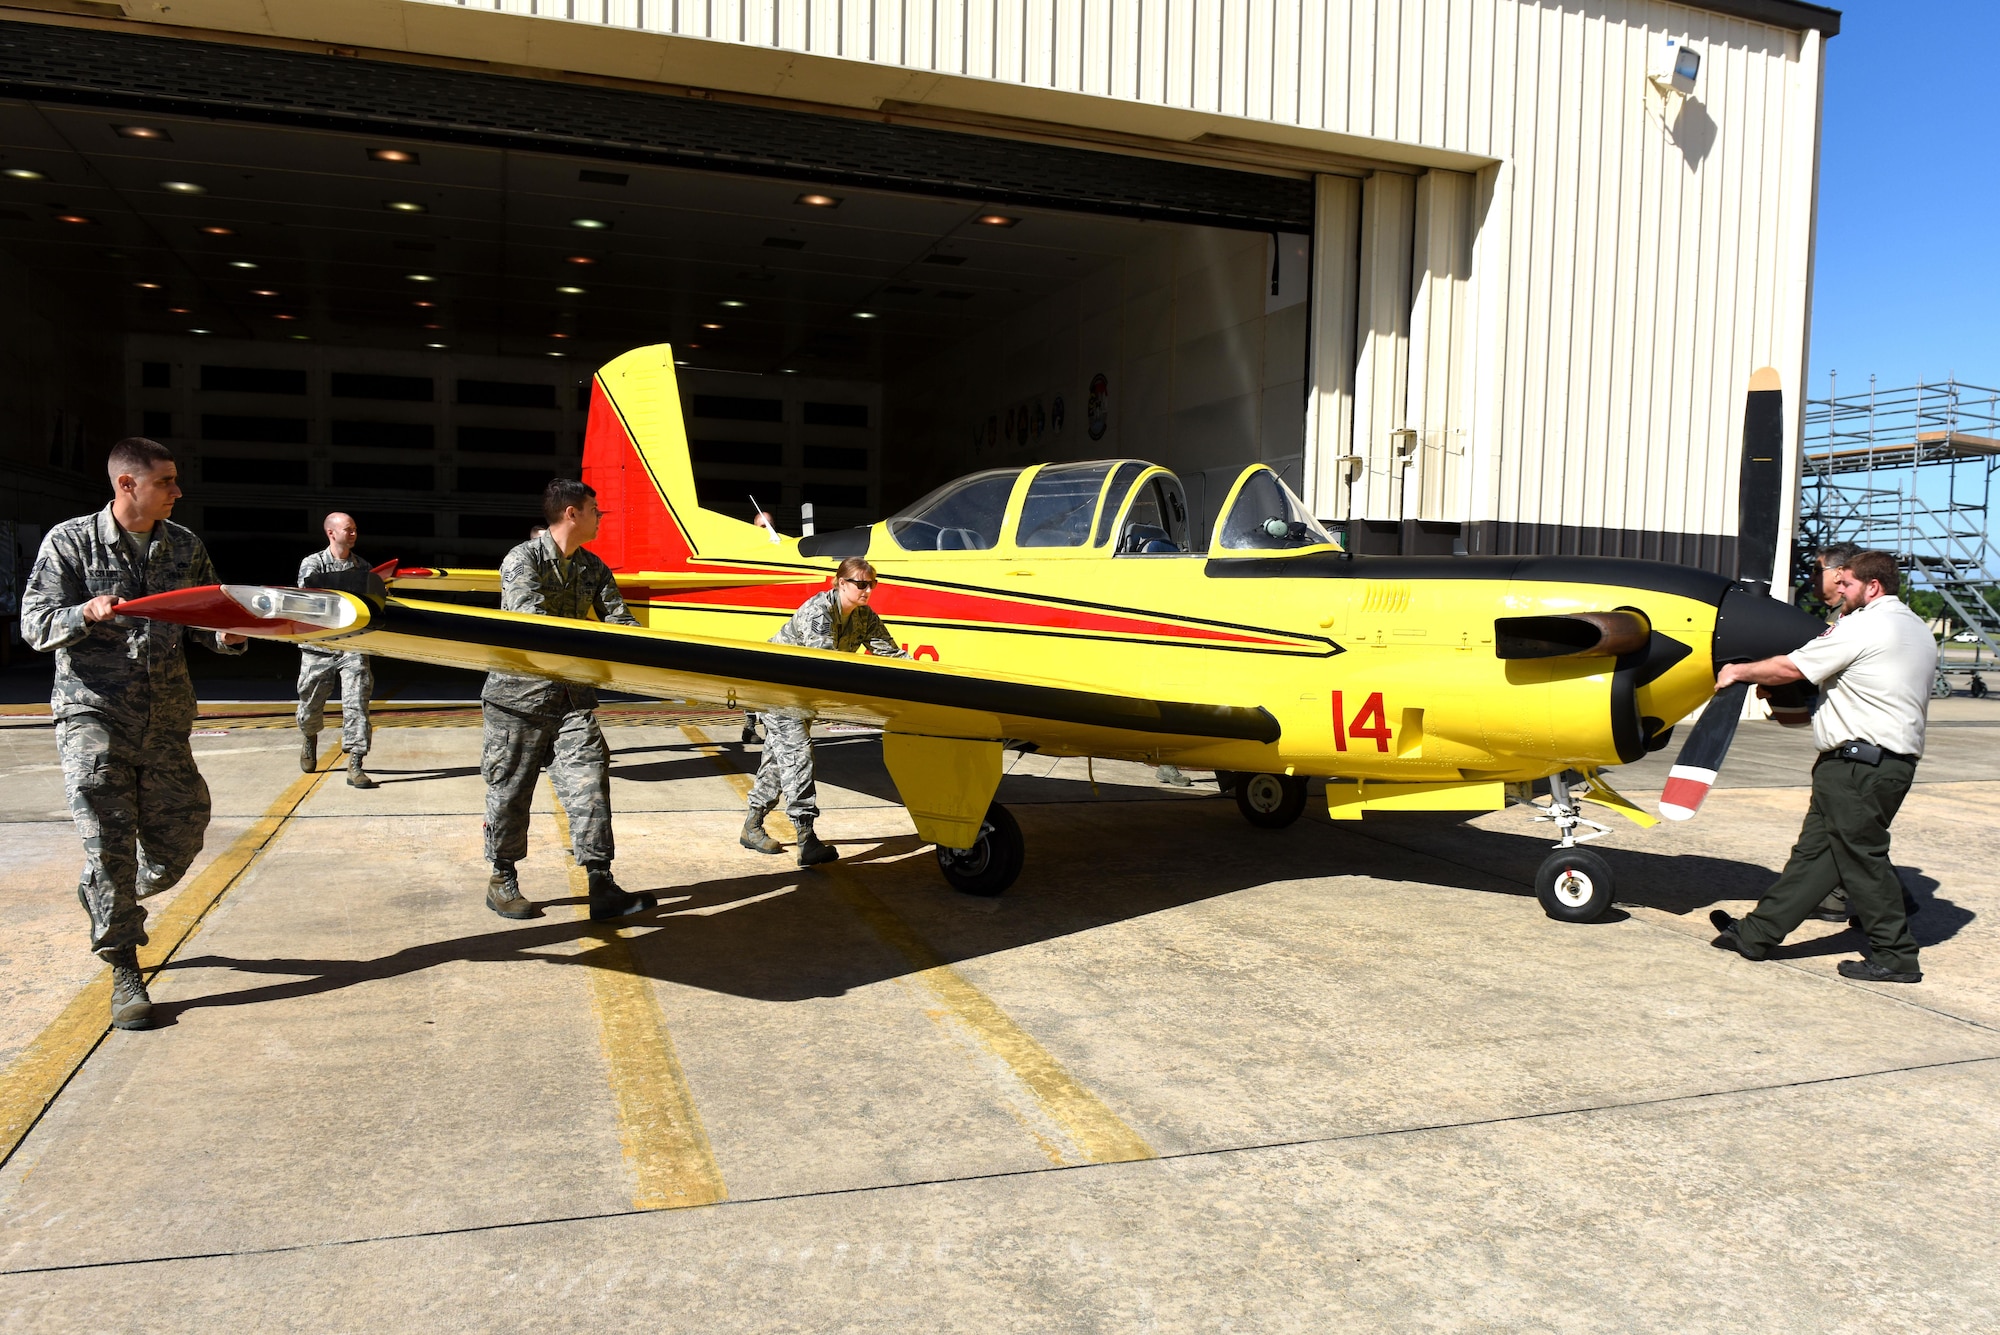 Members from the 4th Equipment Maintenance Squadron corrosion control shop guide a freshly painted North Carolina Forest Service T-34C Turbo Mentor aircraft out of the 4th Equipment Maintenance Squadron corrosion control shop, April 26, 2017, at Seymour Johnson Air Force Base, North Carolina. The aircraft is used as the lead plane to guide tankers over fires so the tankers can drop suppressant on the fire.  (U.S. Air Force photo by Airman 1st Class Ashley Williamson)